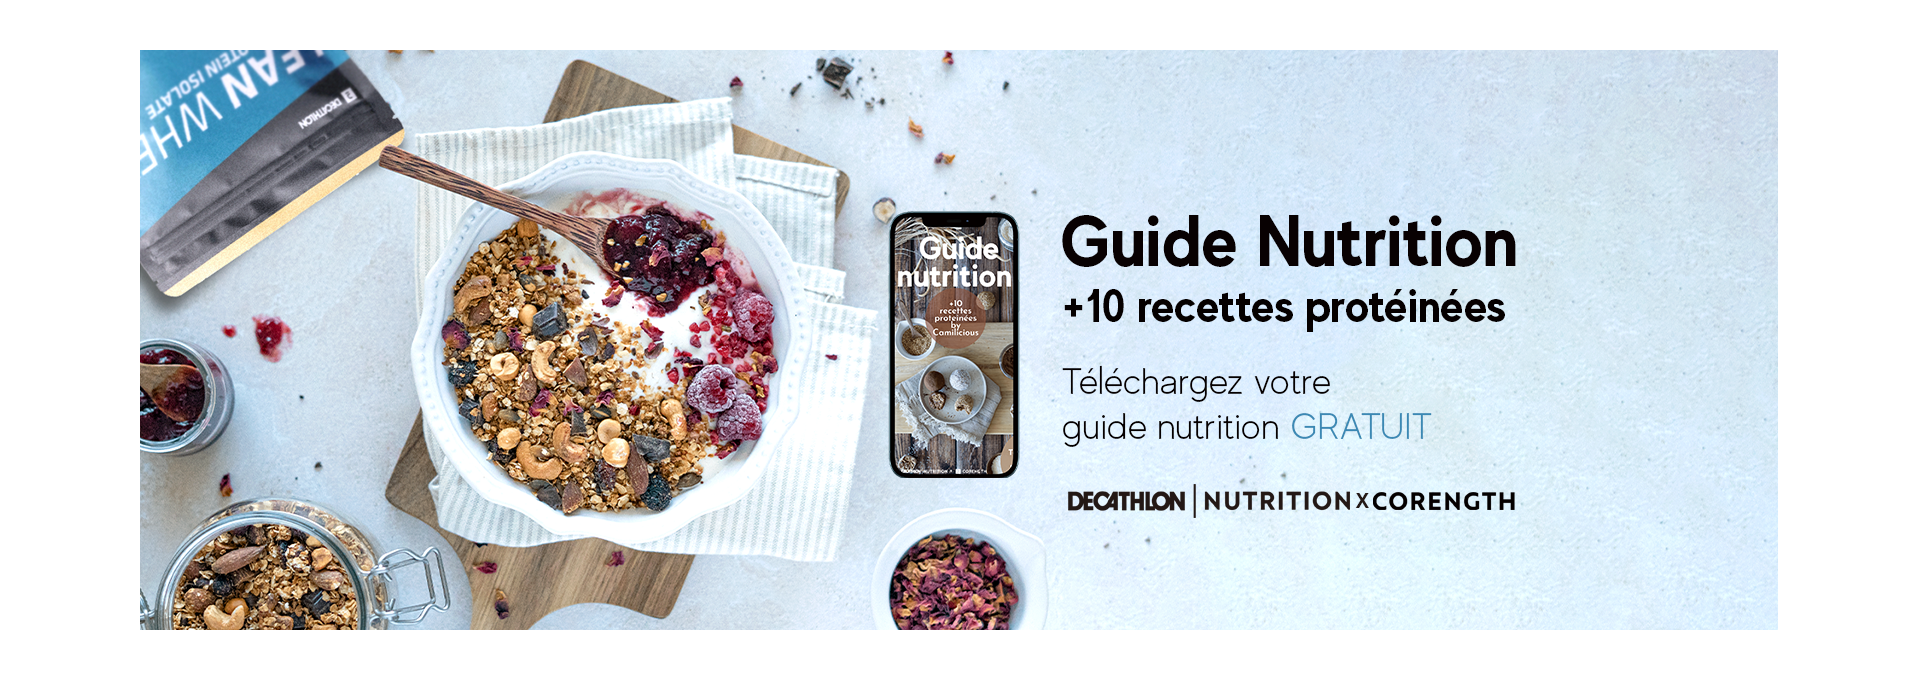 guide nutrition